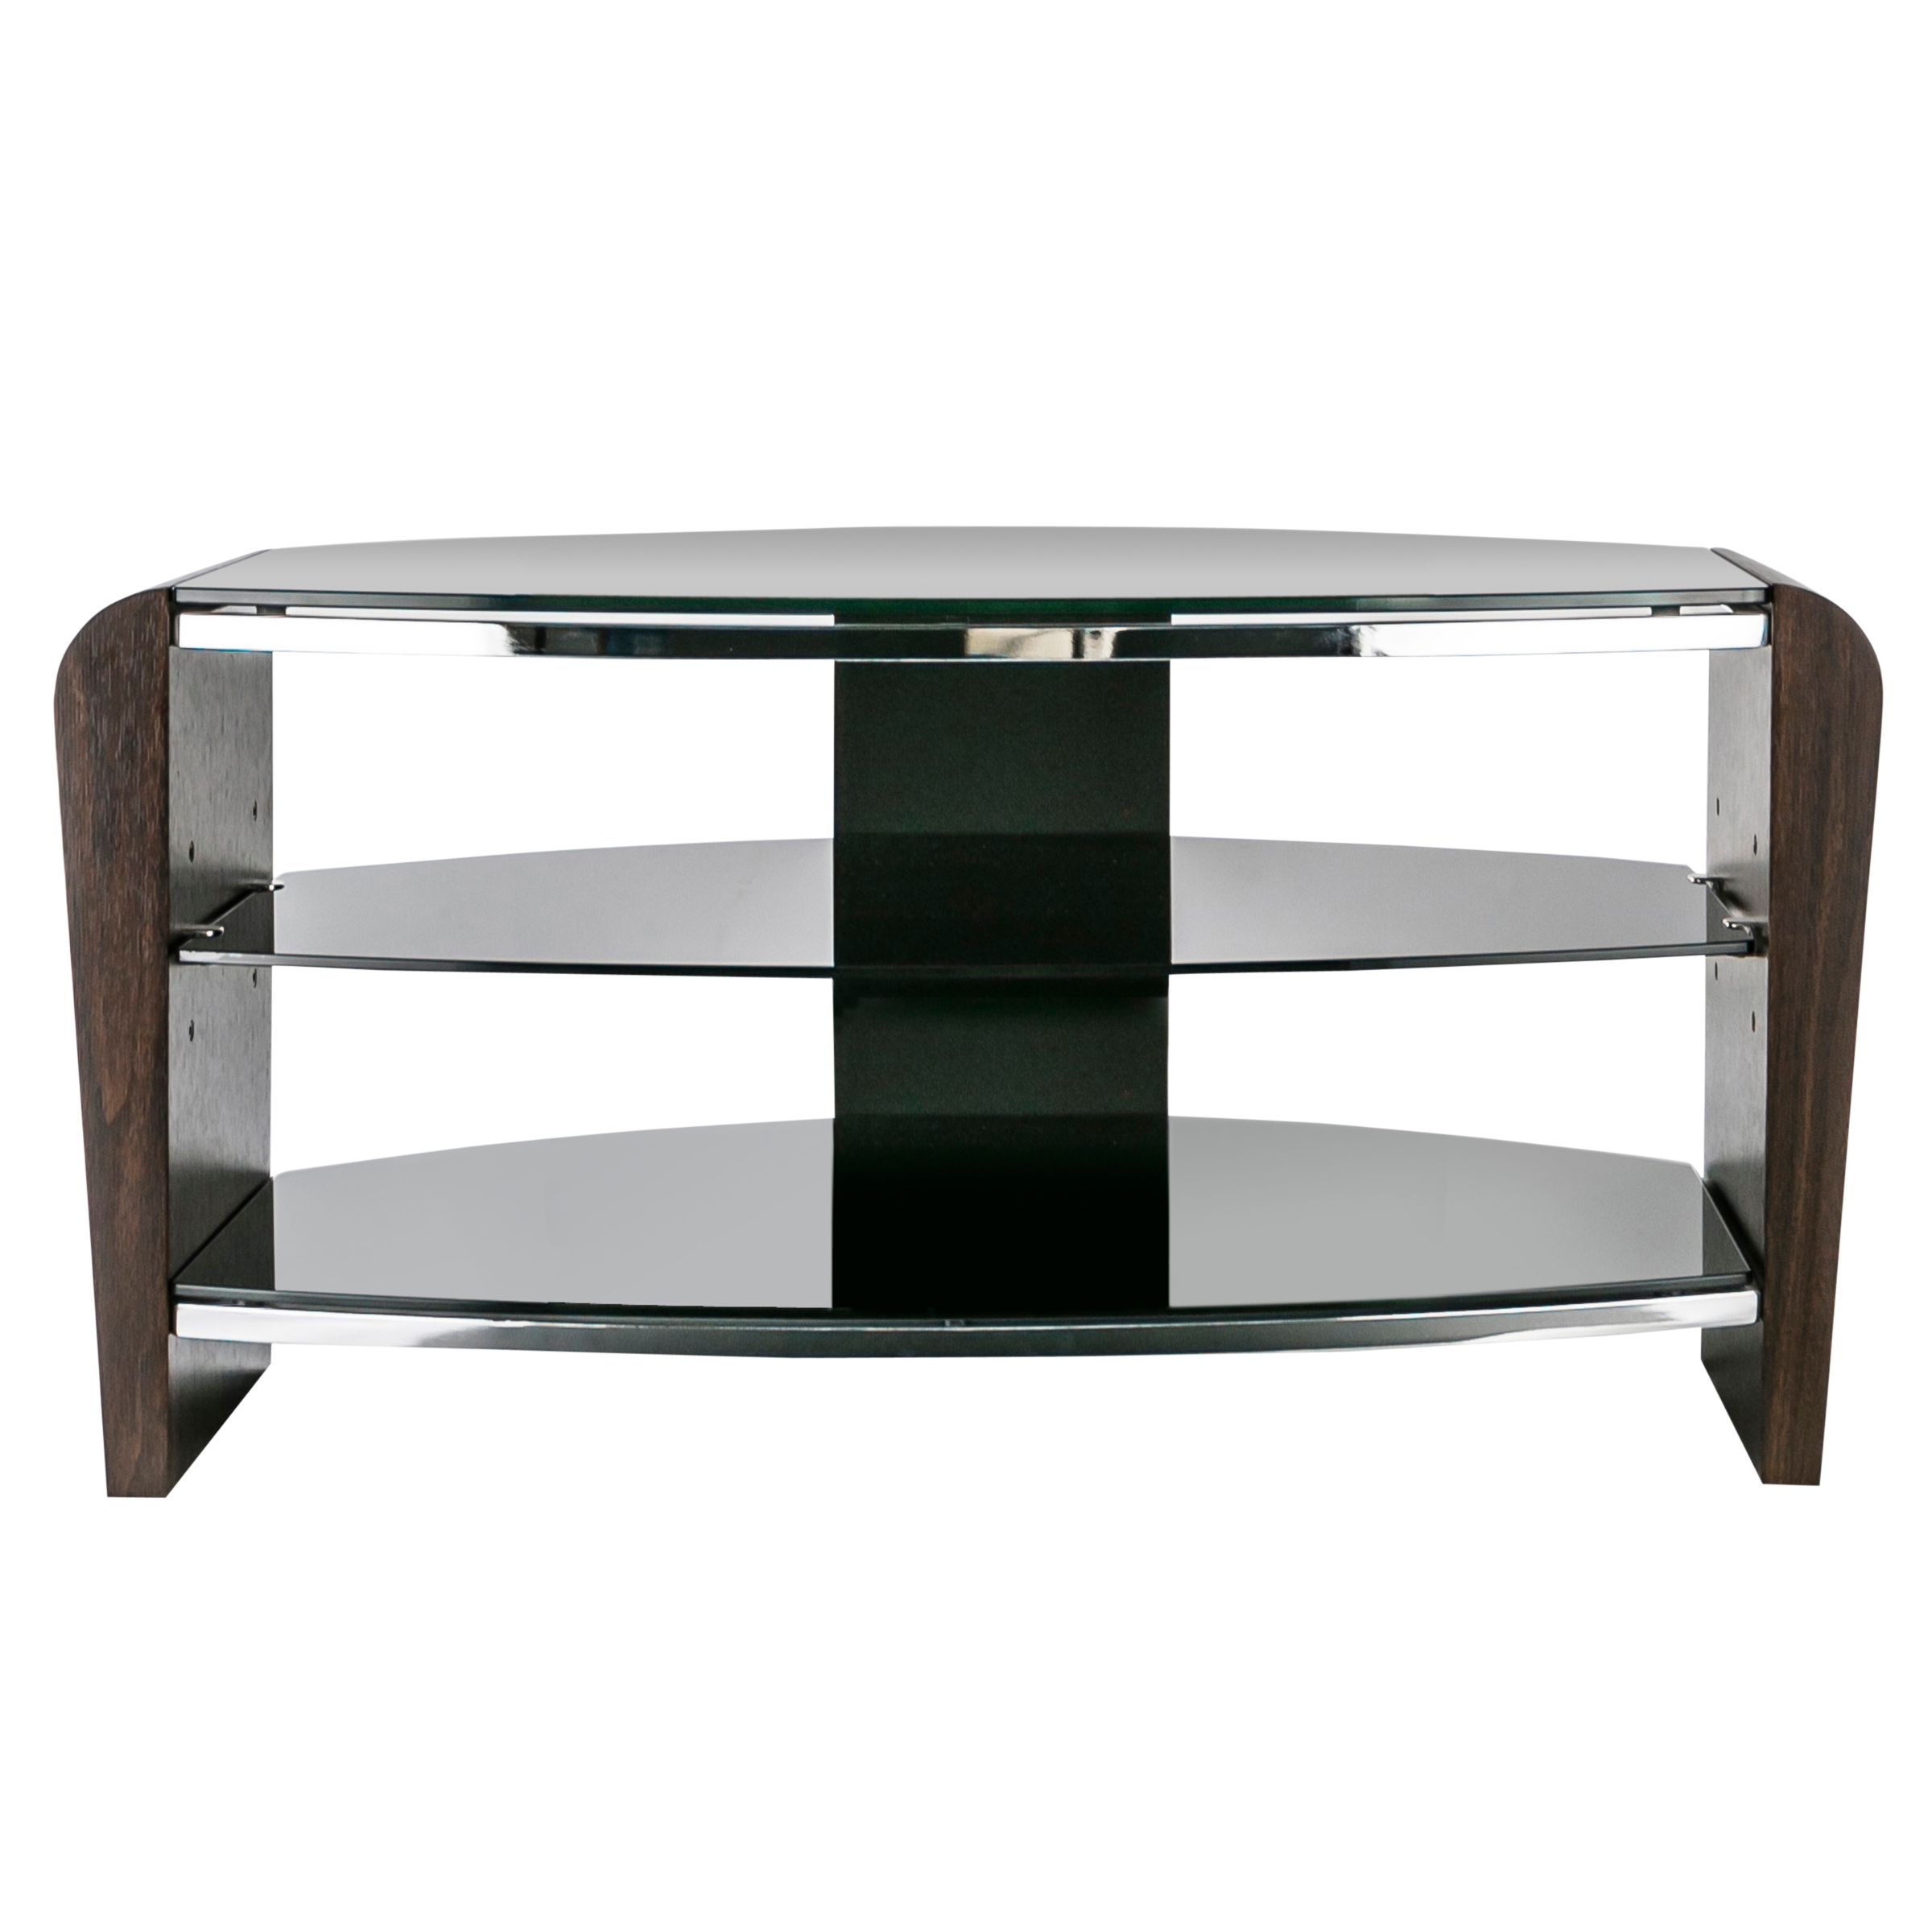 Alphason Francium 80 TV Stand for up to 37" at John Lewis 